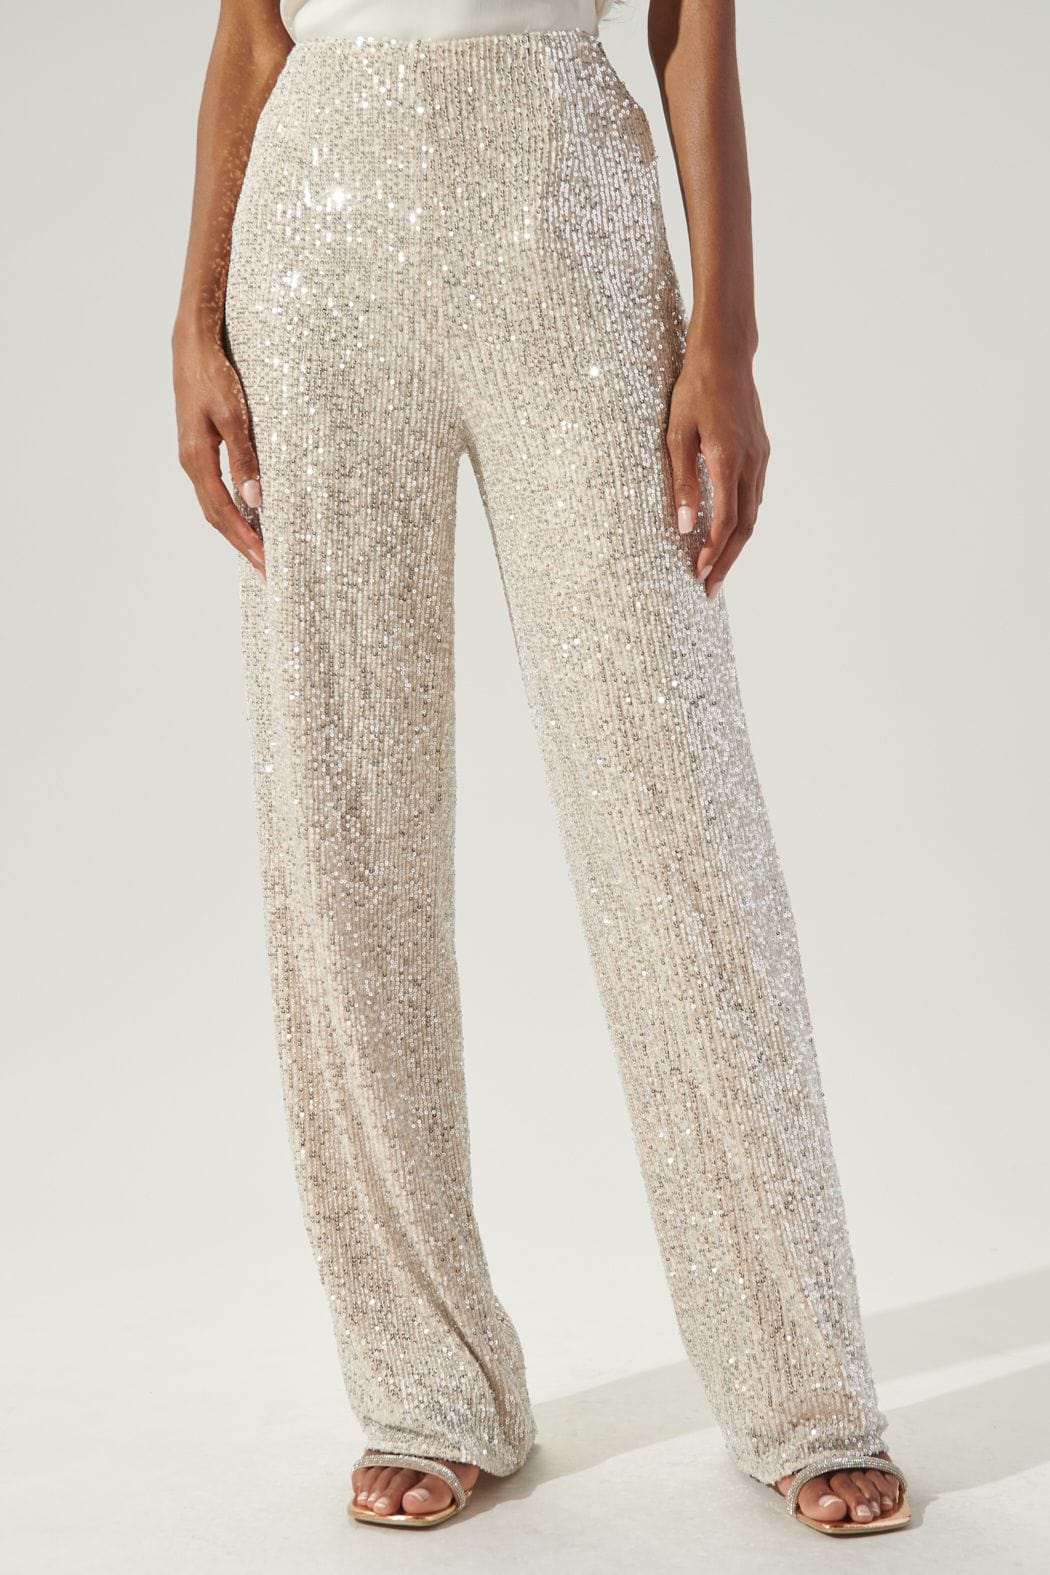 Champagne Toast Sequin High Waist Wide Leg Pants - Pants - Blooming Daily